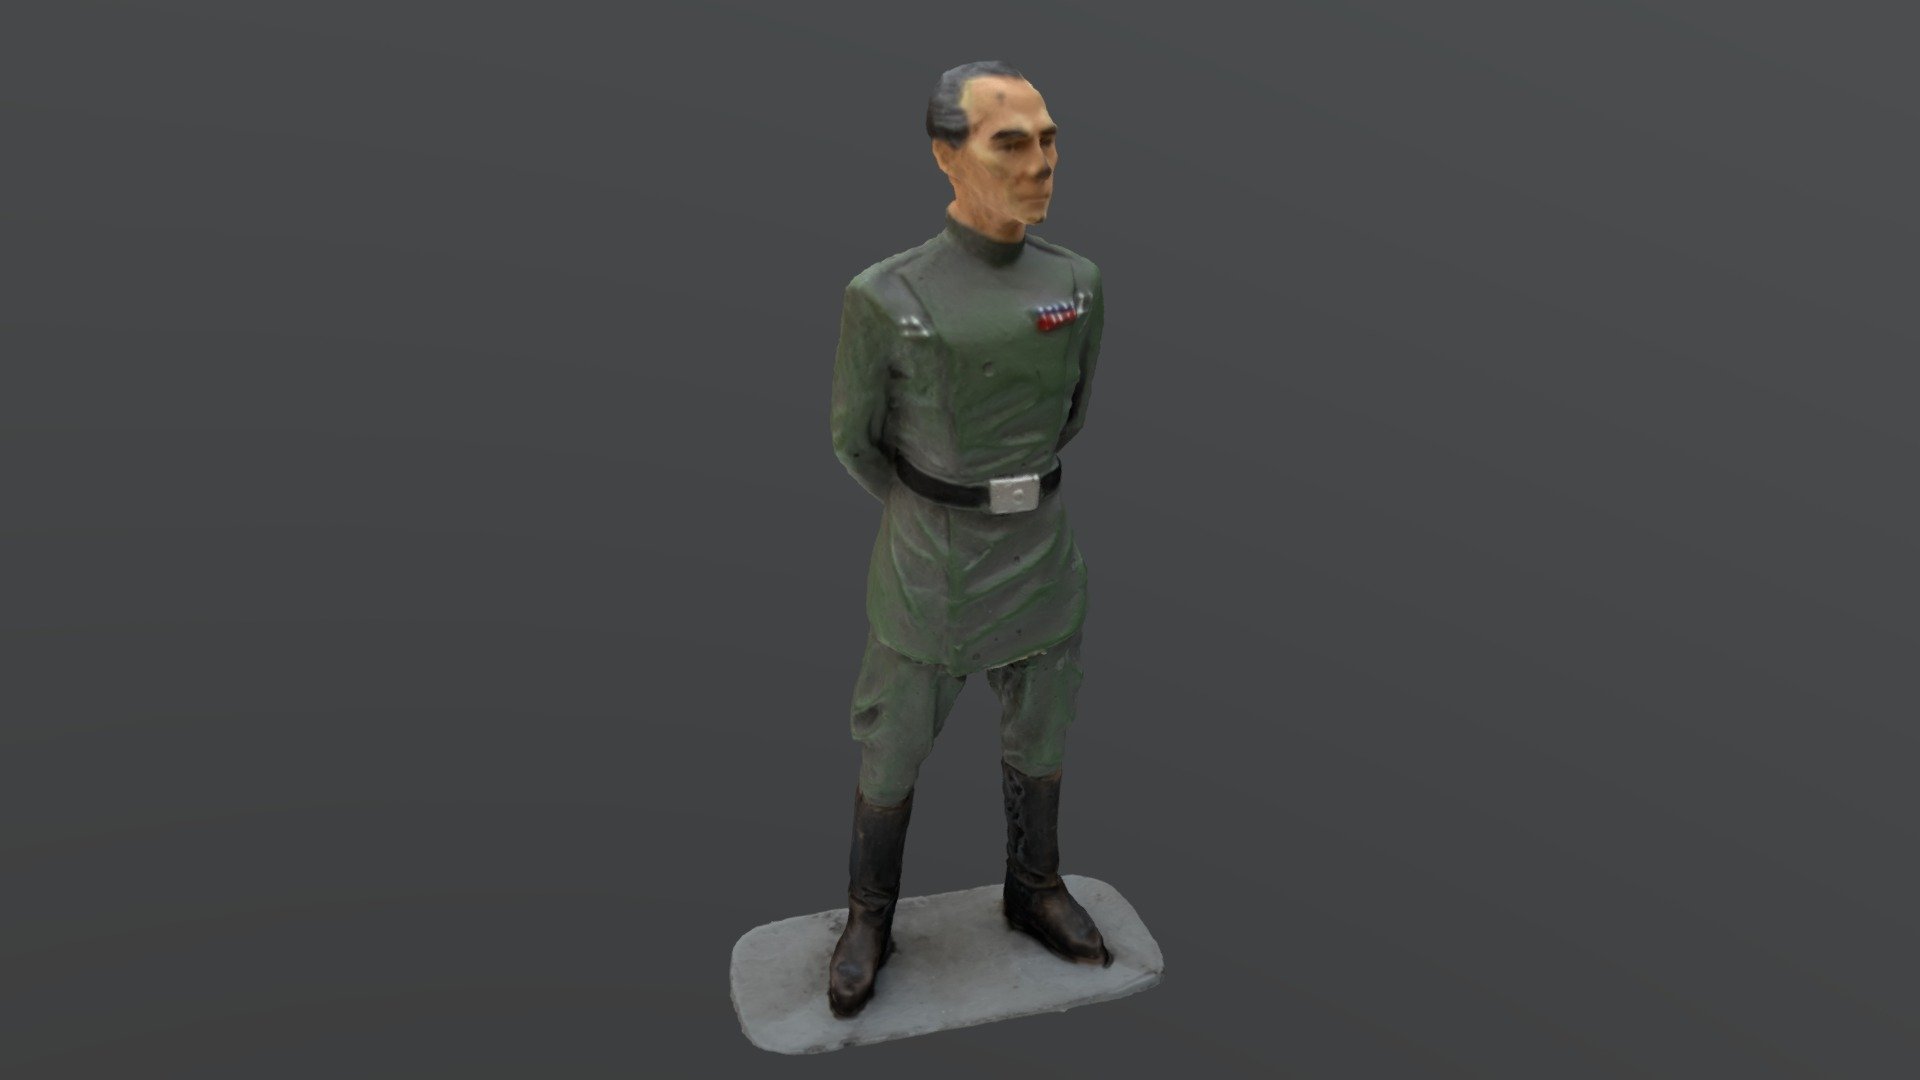 A miniature lead statue of Grand Moff Tarkin, a character from the Star Wars franchise, captured with RealityScan photogrammetry software 3d model